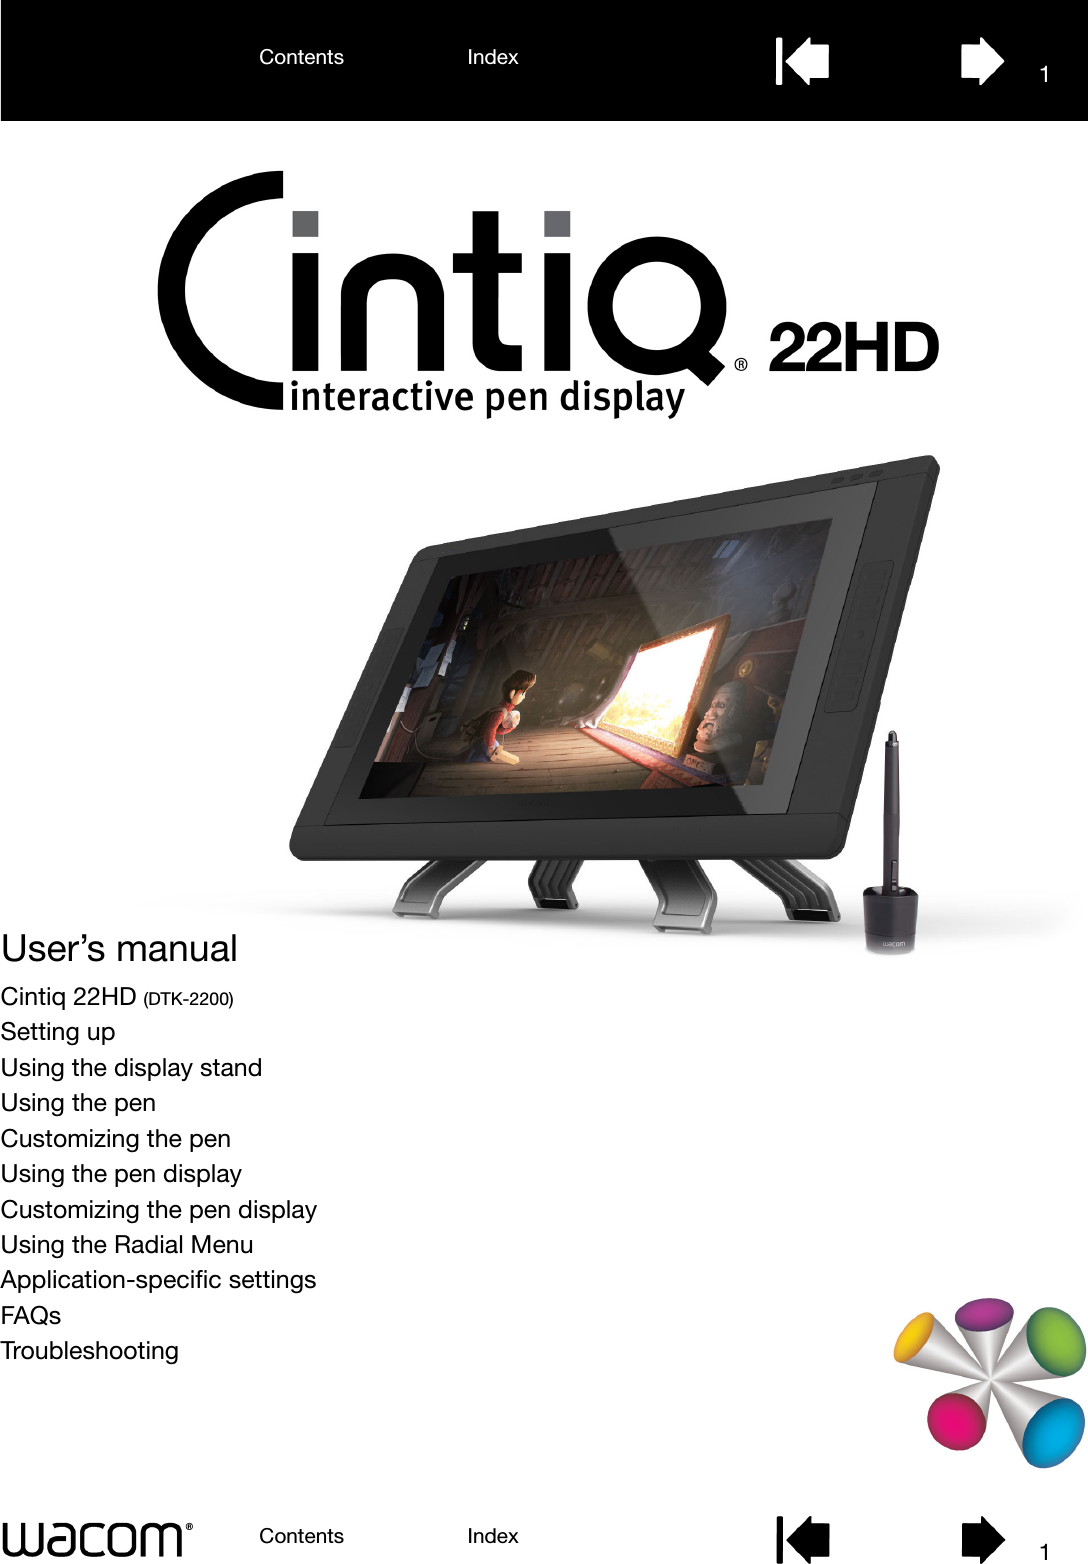 User’s manualContents IndexContents 1Index1Cintiq 22HD (DTK-2200)Setting upUsing the display standUsing the penCustomizing the penUsing the pen displayCustomizing the pen displayUsing the Radial MenuApplication-specific settingsFAQsTroubleshooting